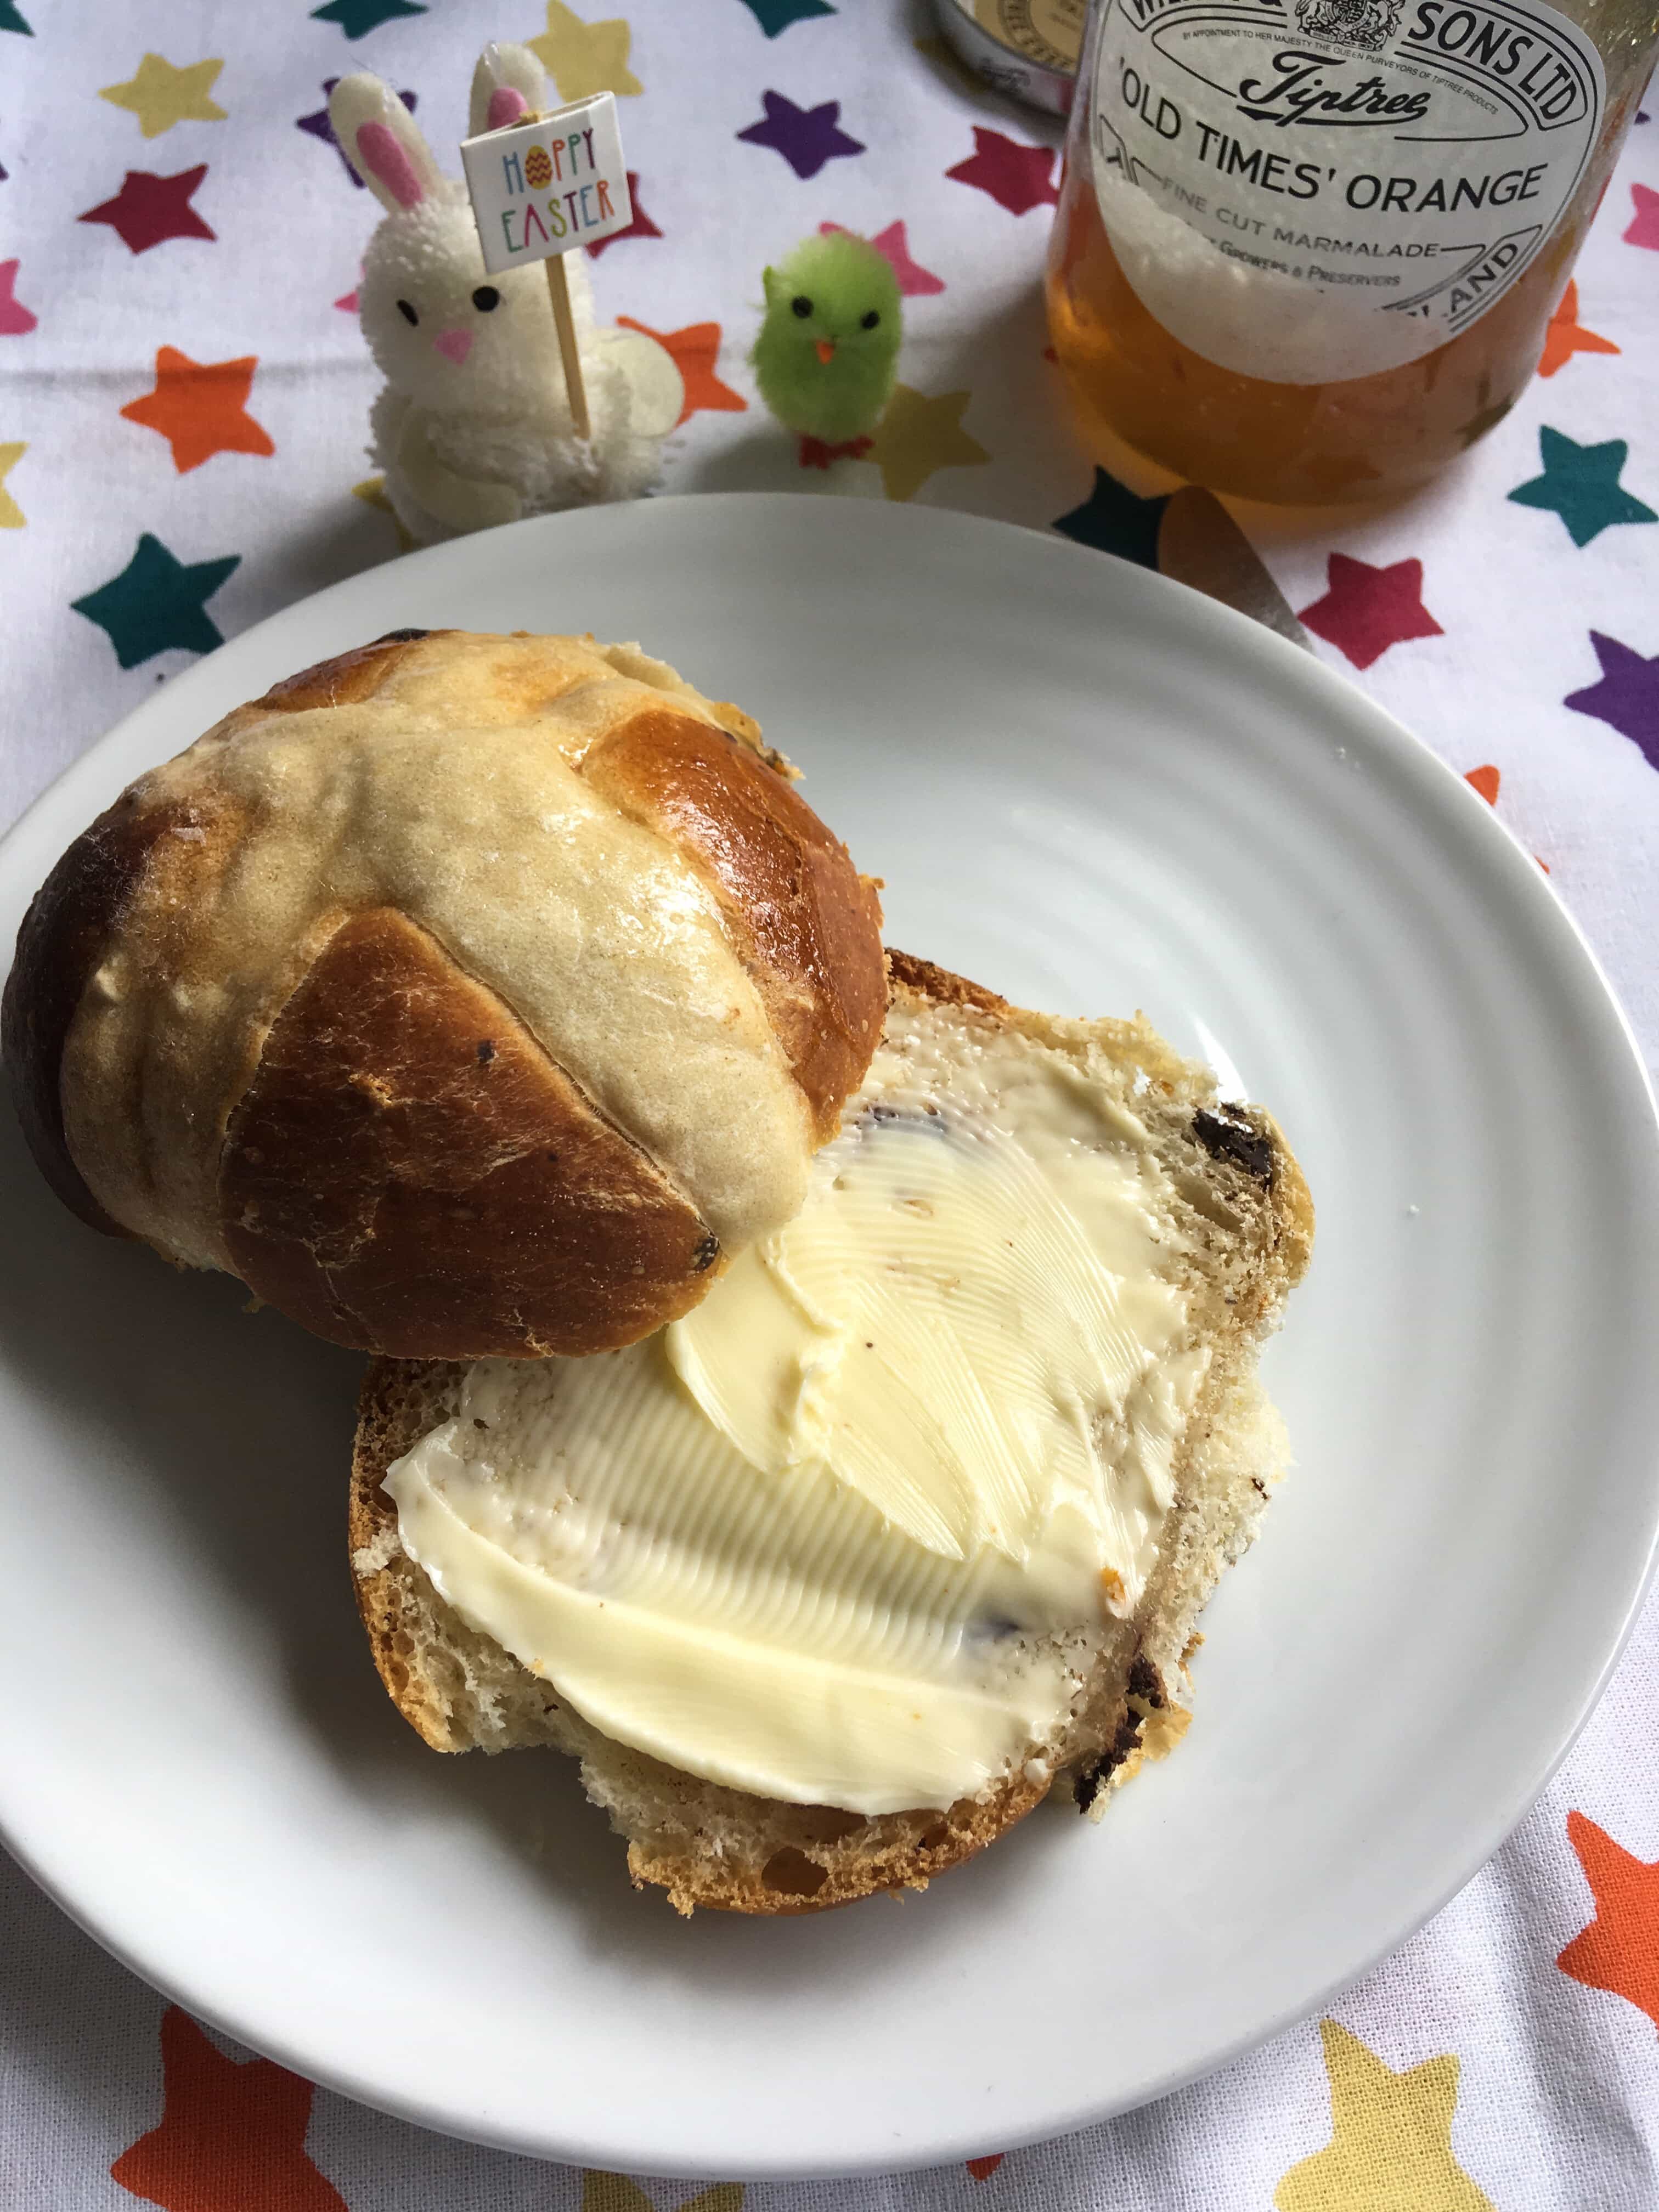 A chocolate orange hot cross bun split in half and spread with butter.